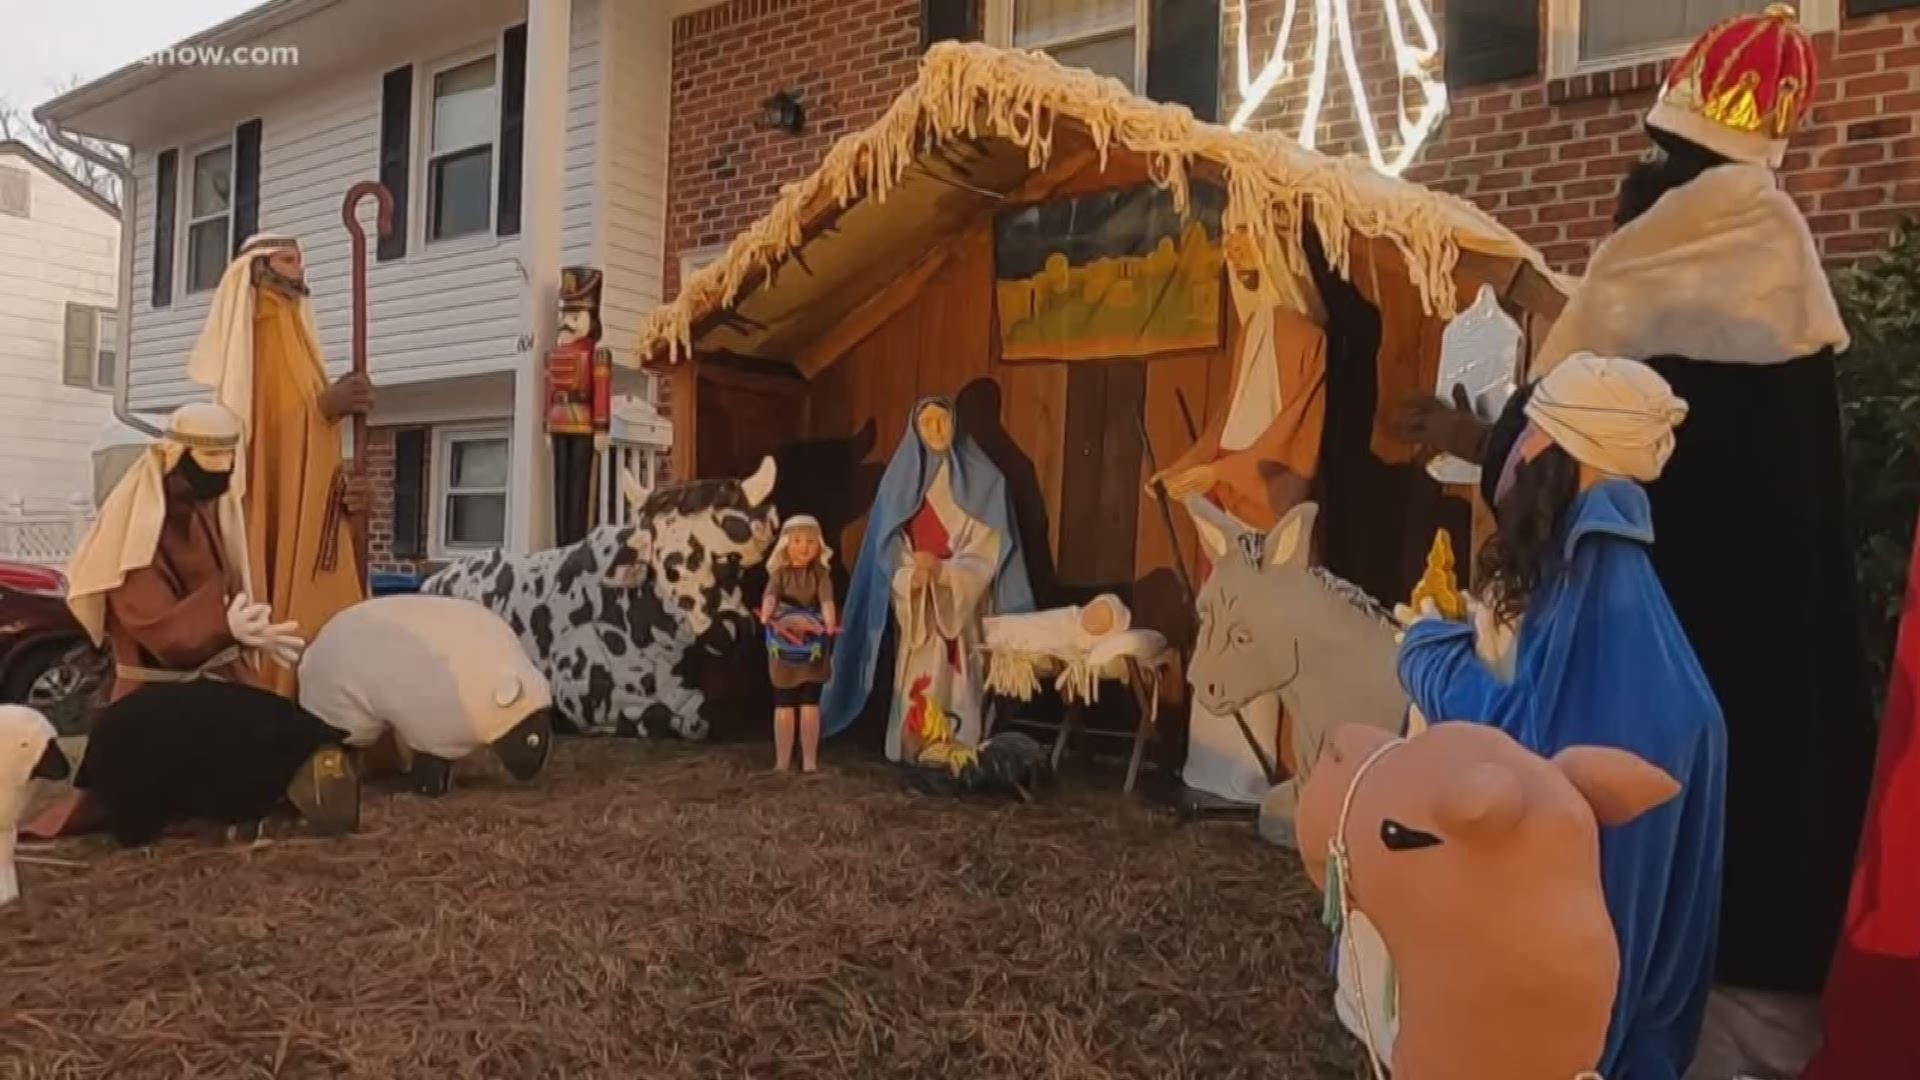 Kay and Keith Richie's life-size Nativity scene outside of their home in Windsor Woods in Virginia Beach showcases homemade pieces the couple created.